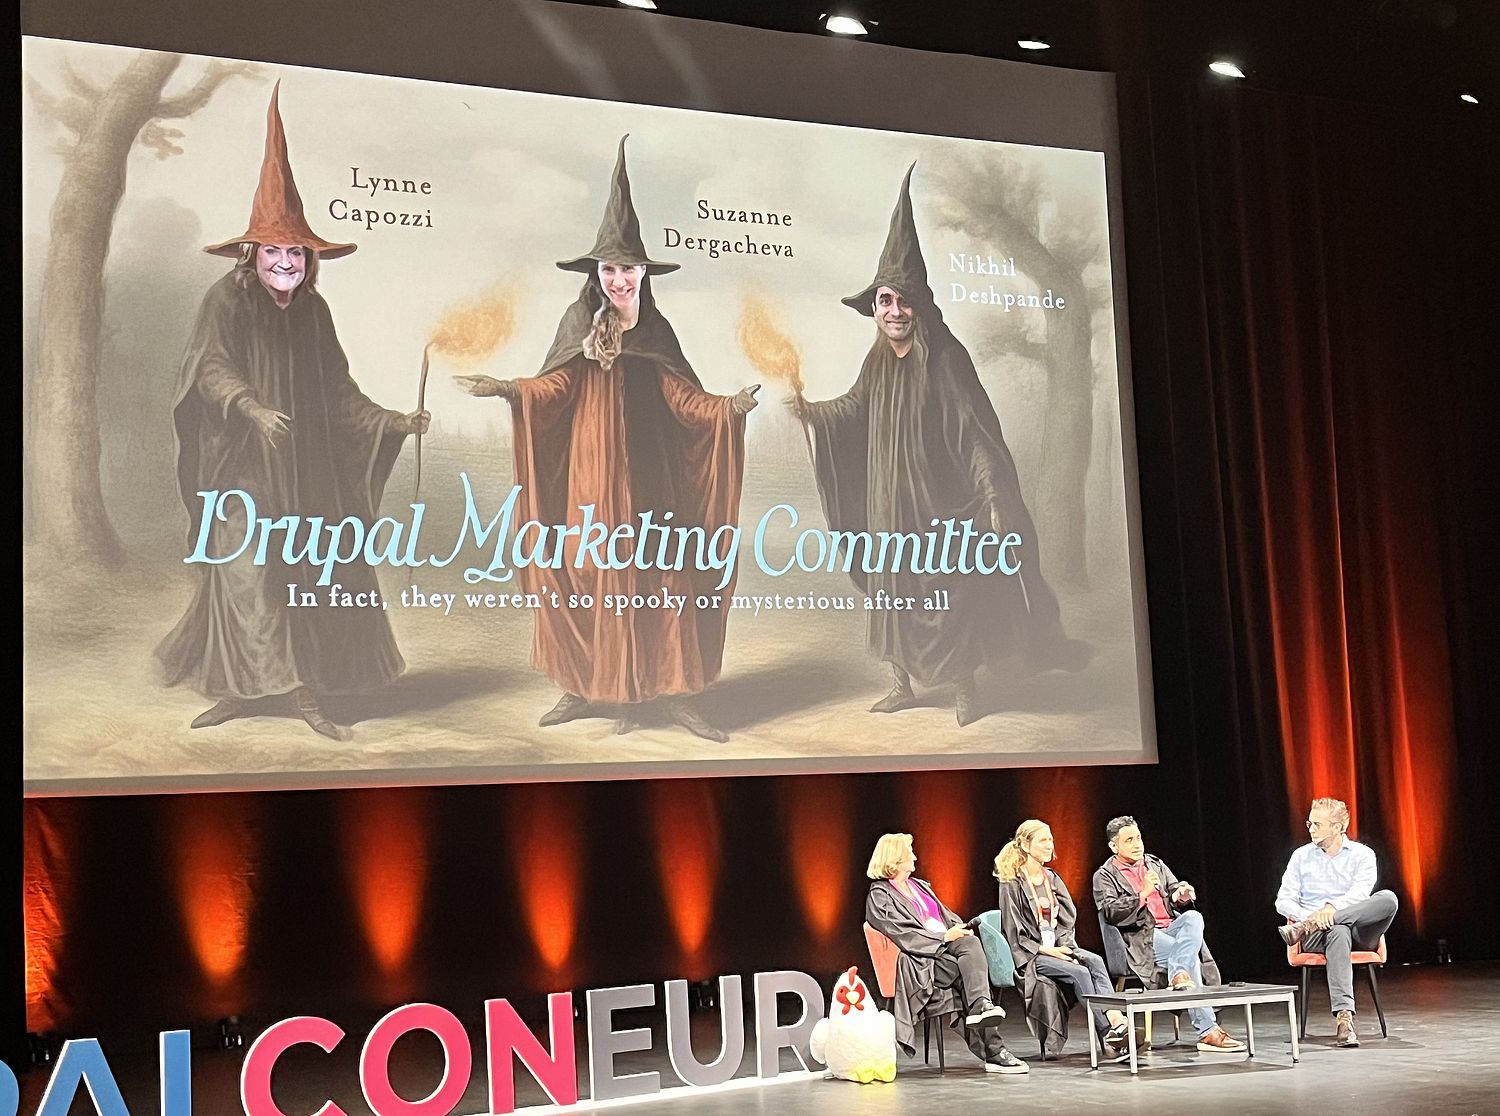 Stage with four people seated below a projection screen showing three persons dressed as witches or wizards. Label: Drupal Marketing Committee.